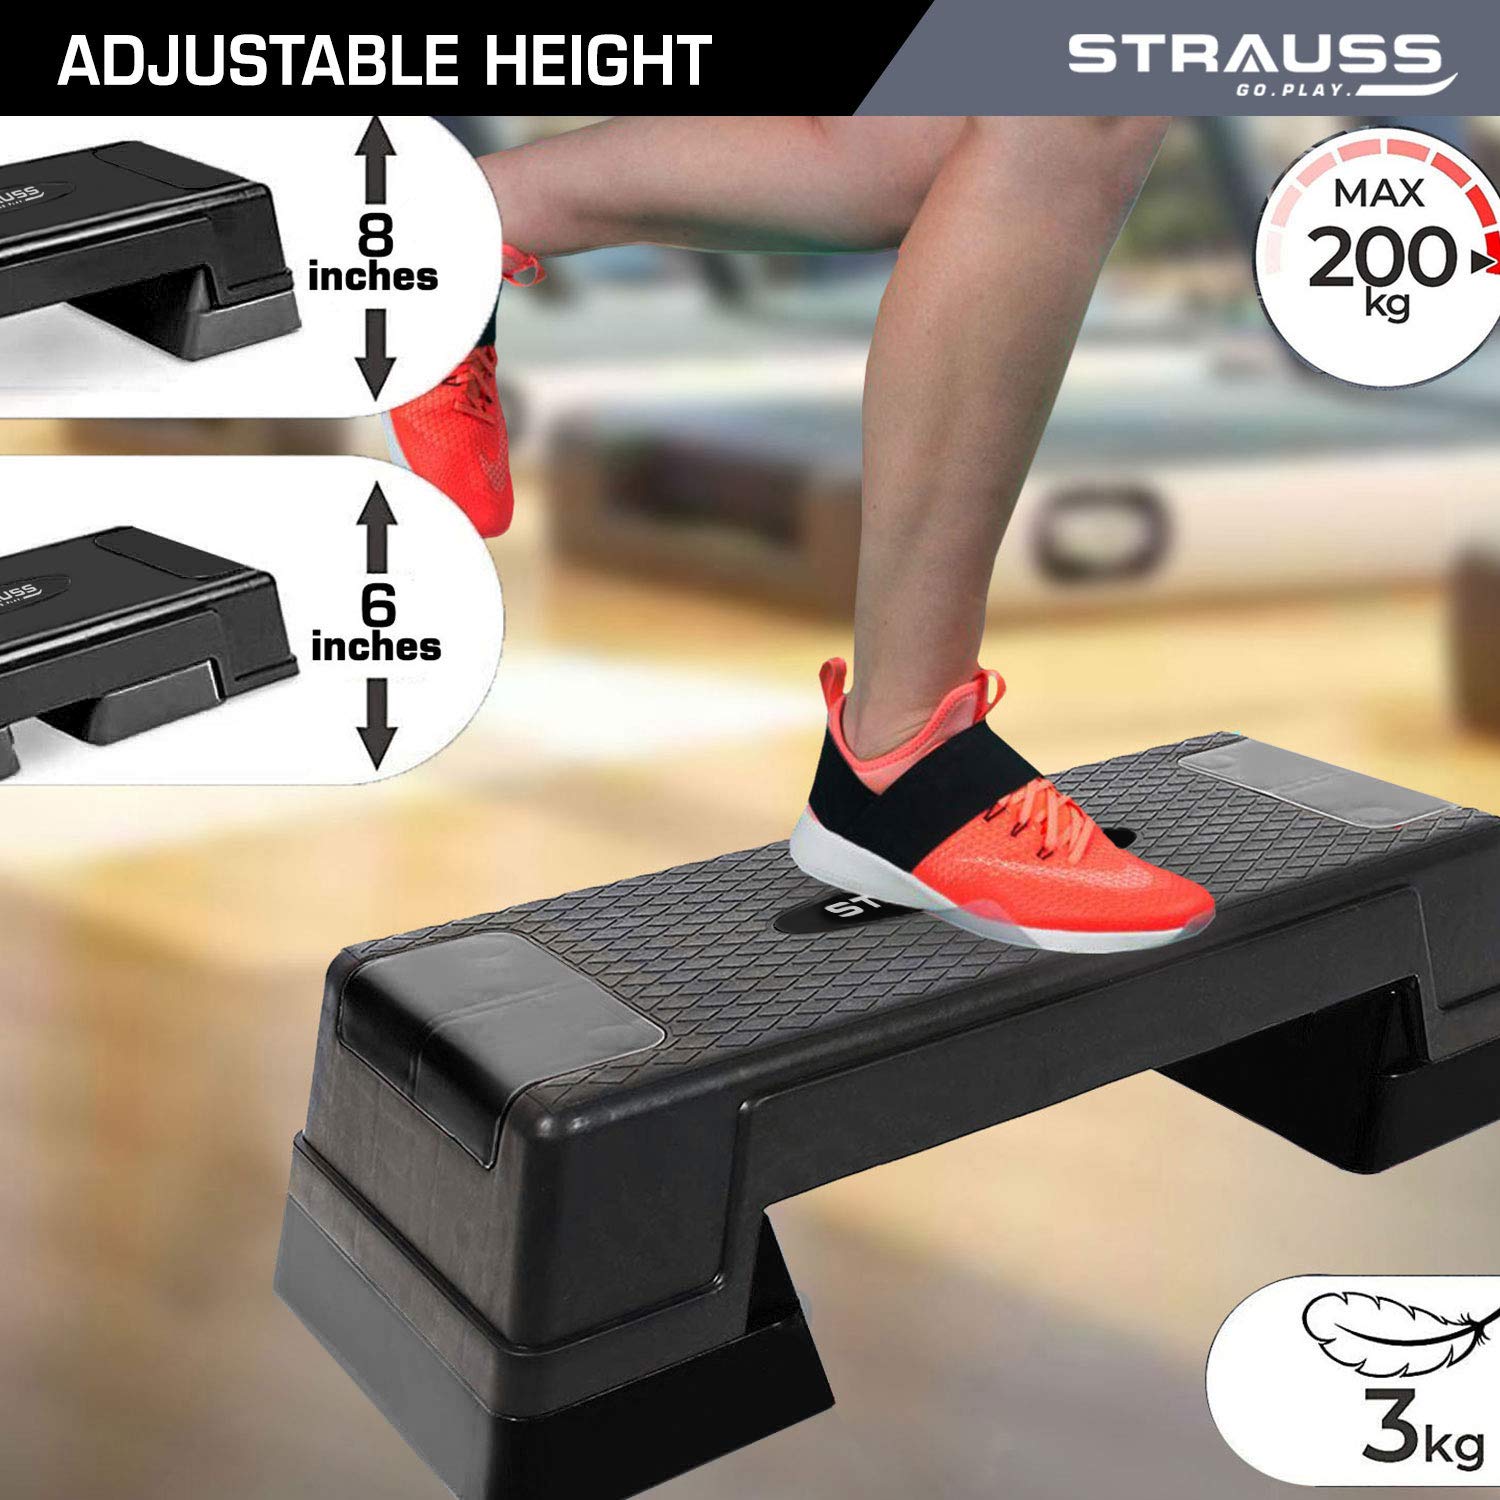 Strauss High Rise Aerobic Stepper | Two Height Level Adjustments - 6 inches and 8 inches | Slip-Resistant & Shock Absorbing Platform for Extra-Durability - Supports Upto 200 KG, (Black)